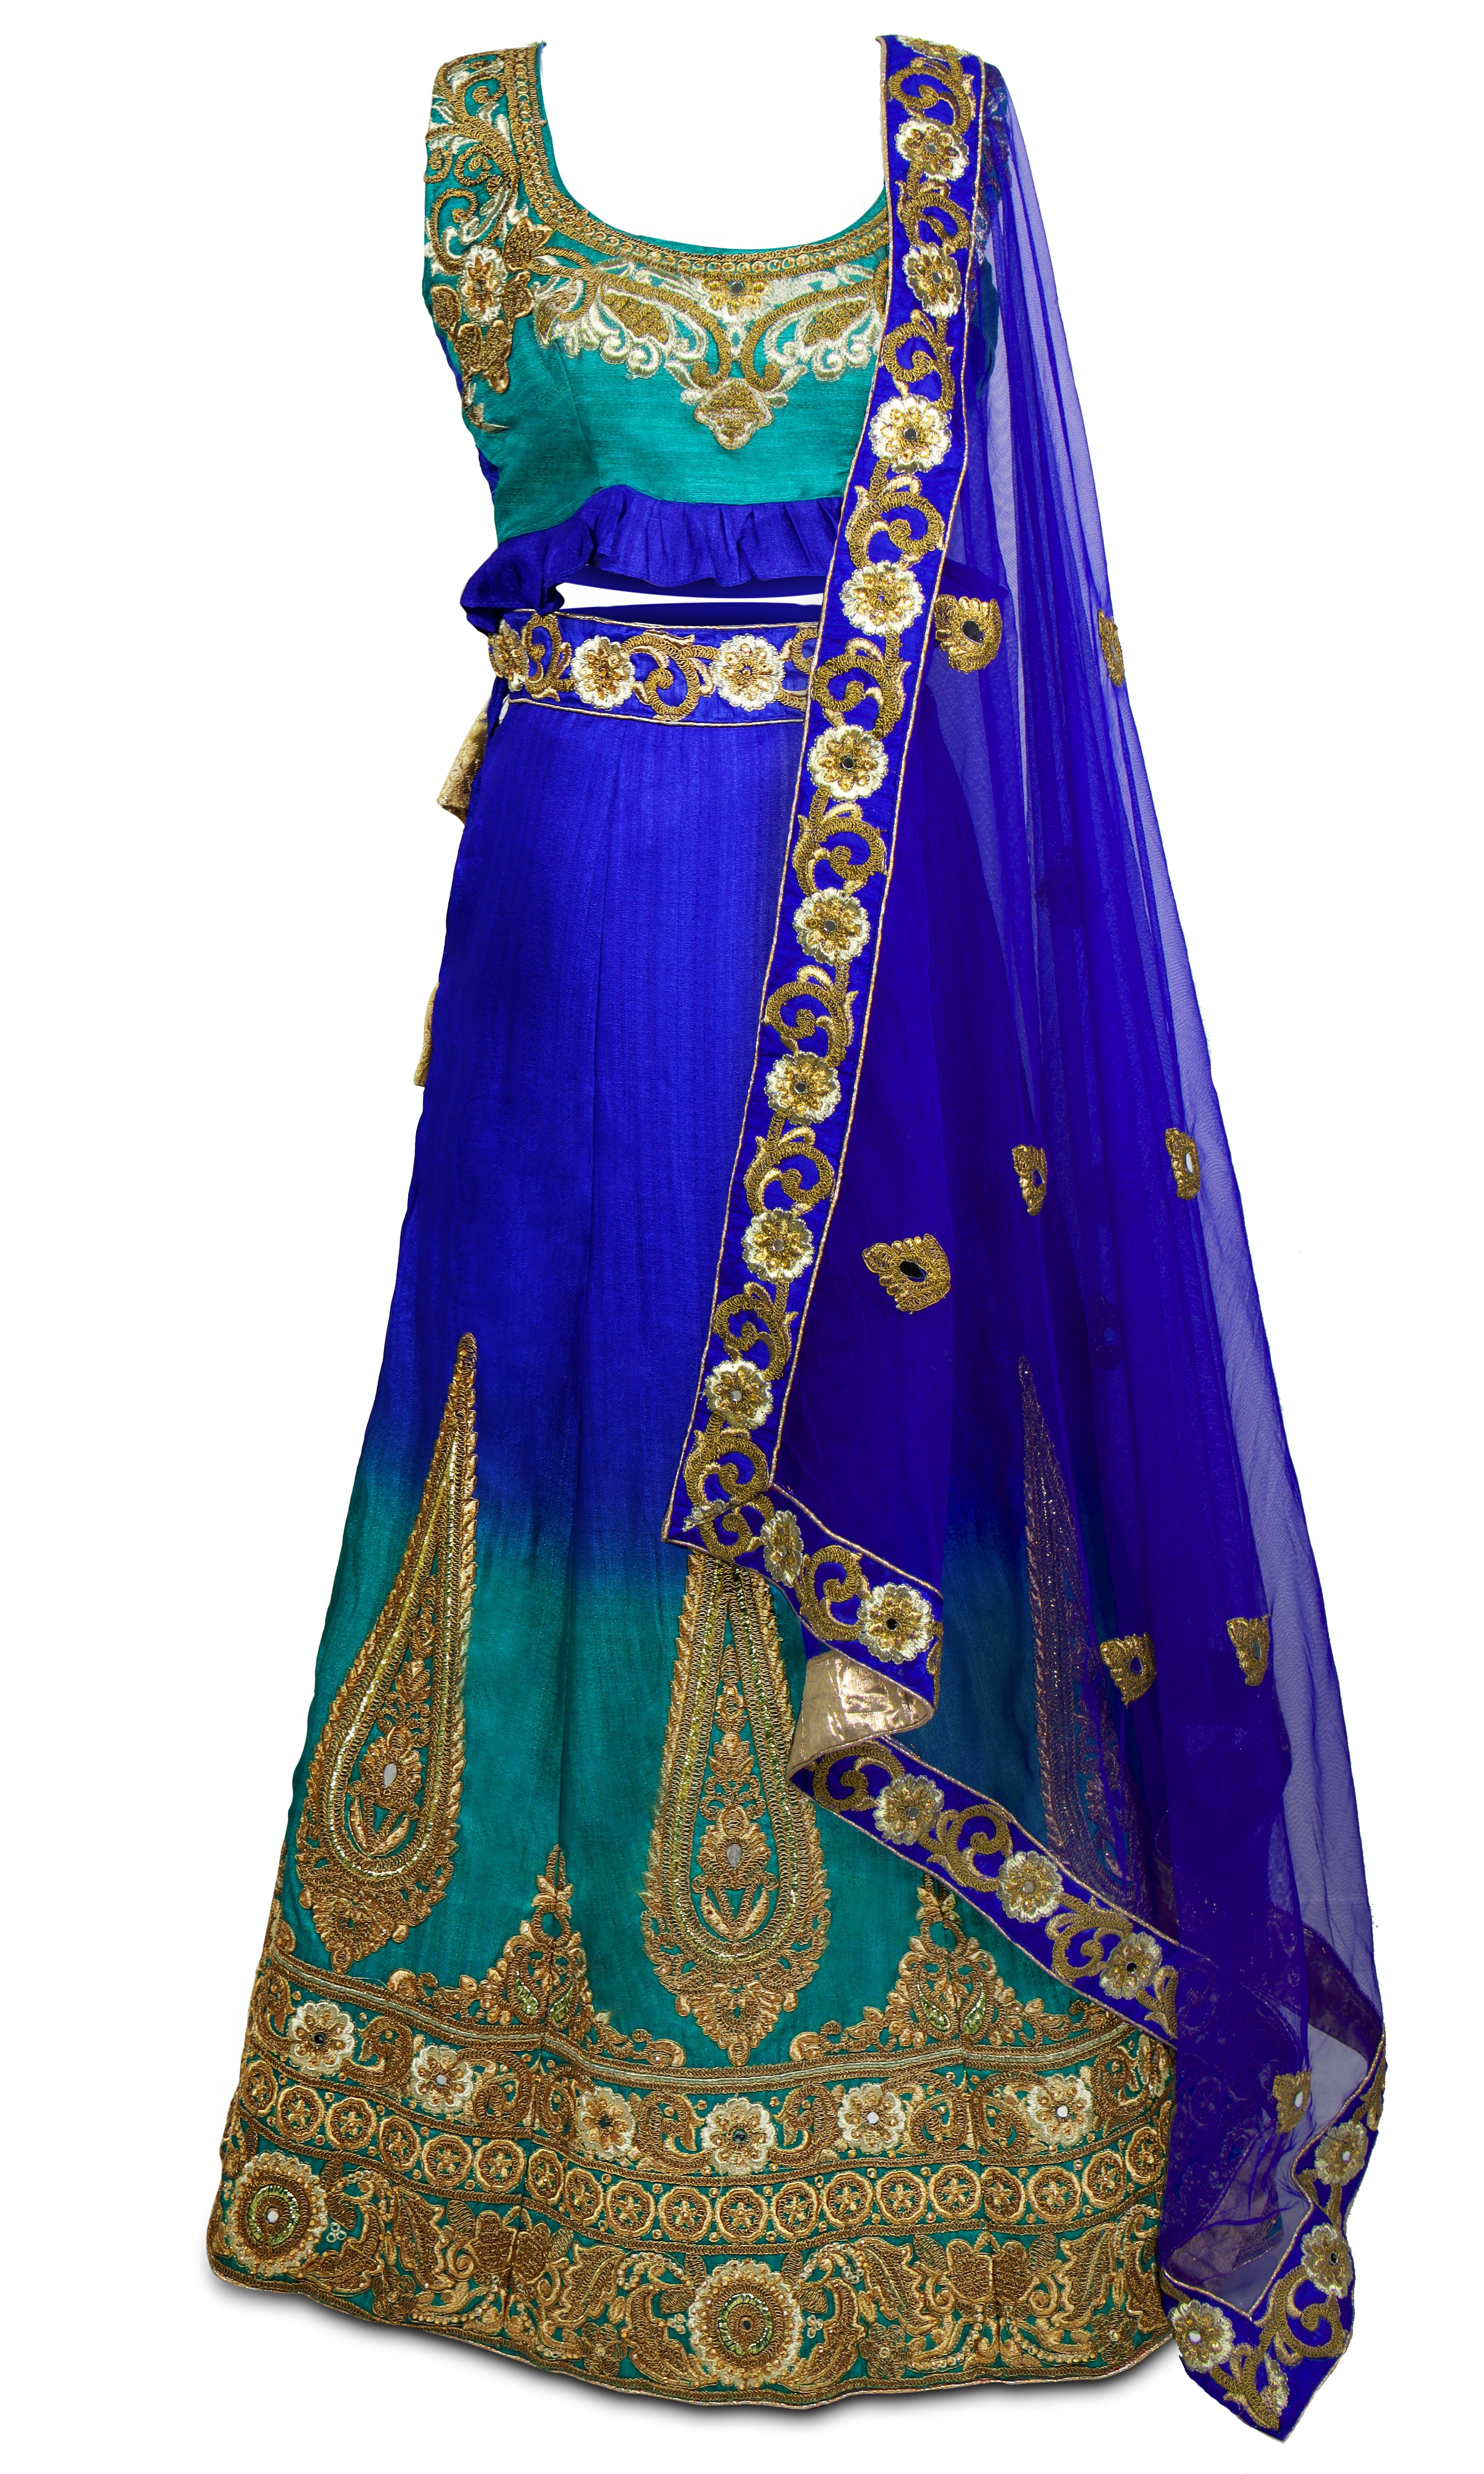 Blue Ombre color lehenga decorated with gold embroidery all throughout